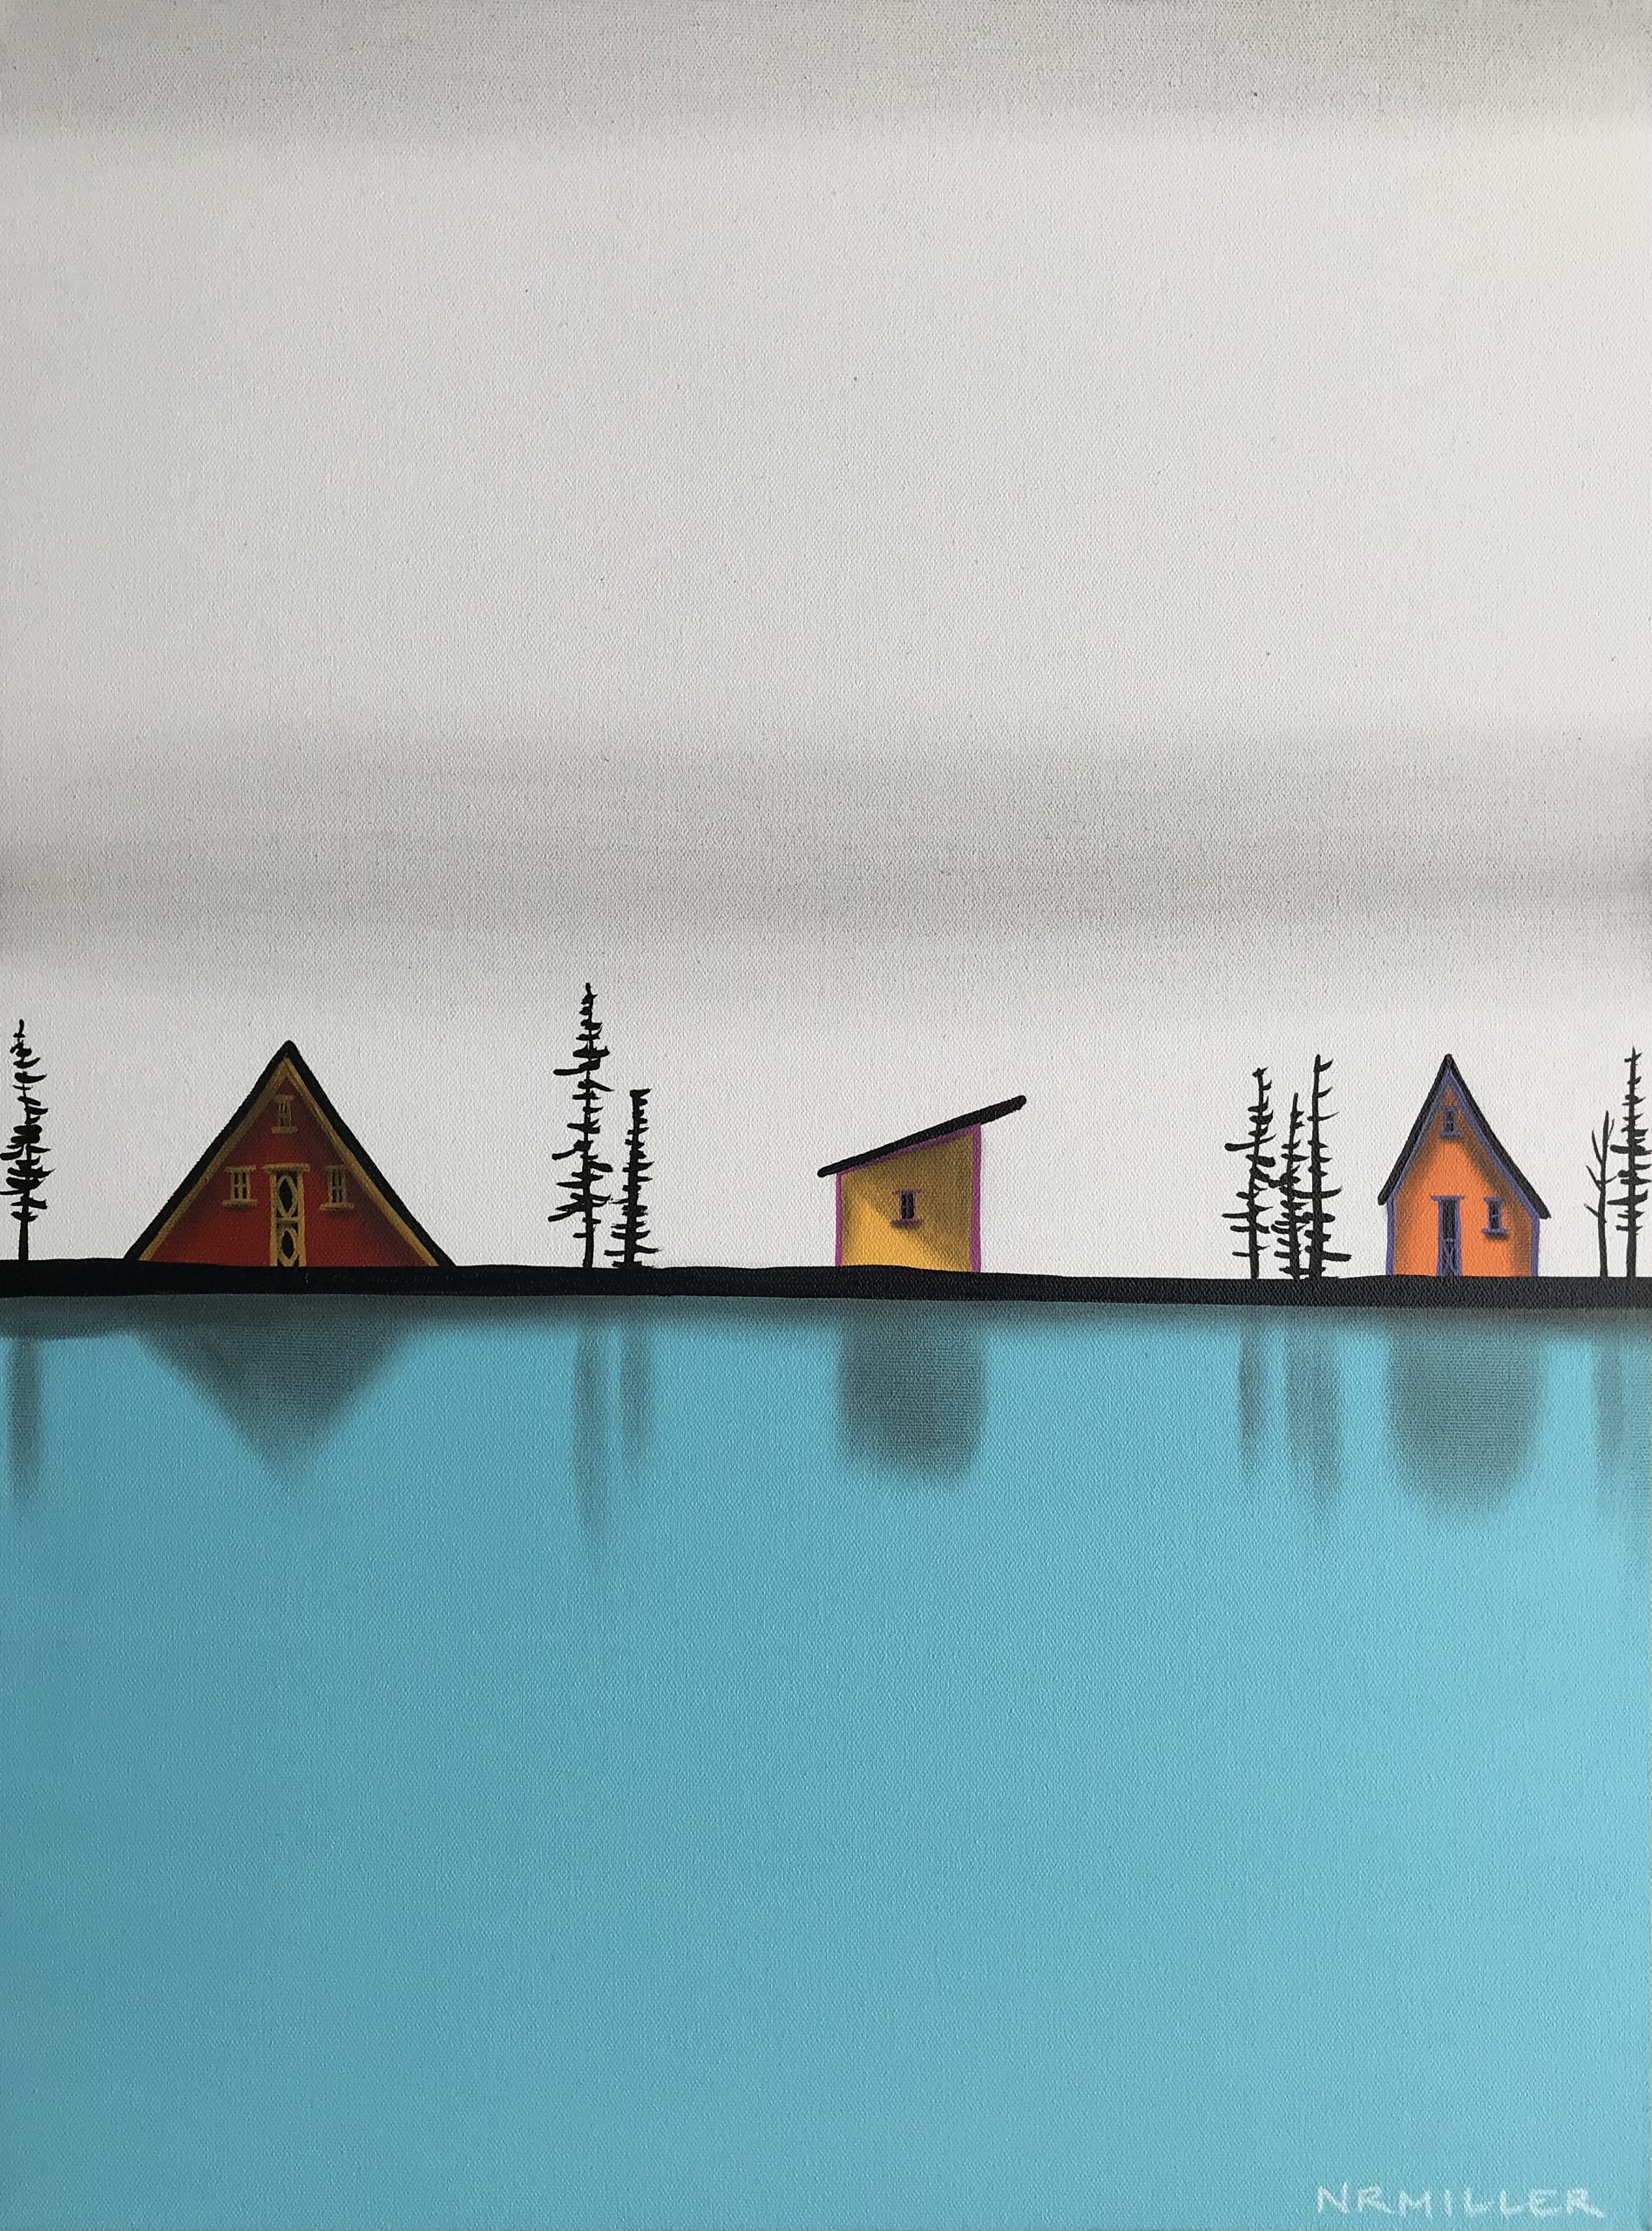 To Want for Nothing, mixed media landscape painting by Natasha Miller | Effusion Art Gallery + Cast Glass Studio, Invermere BC